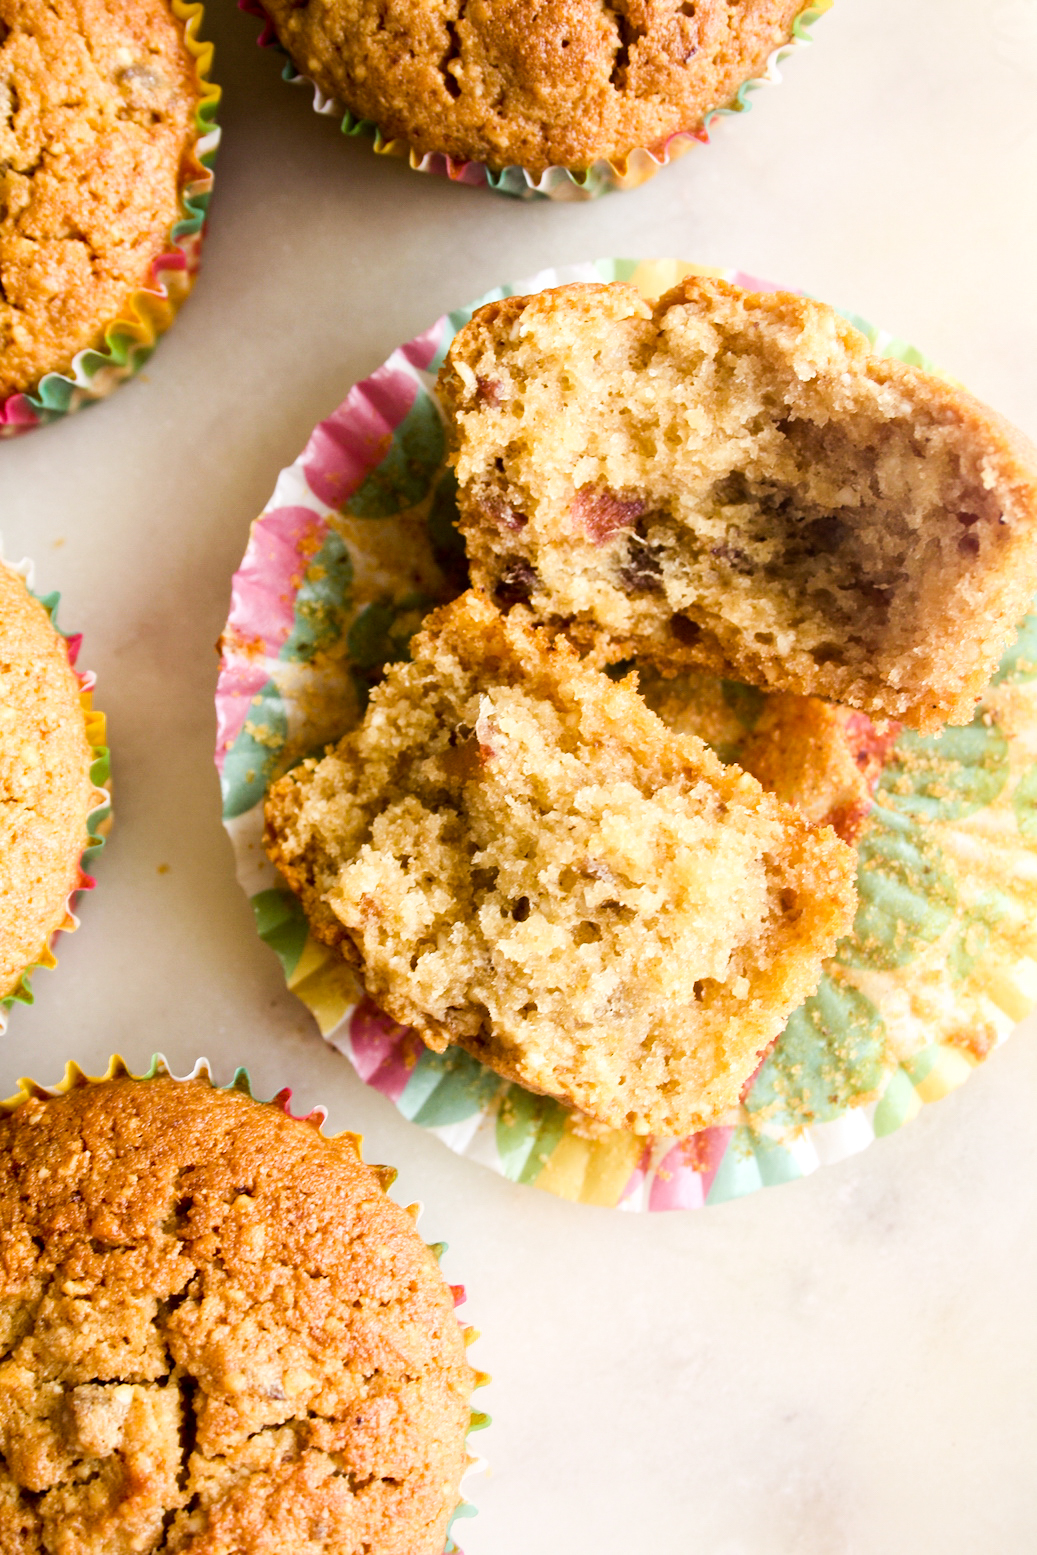 Moist, naturally sweetened muffins with almonds and wholewheat flour